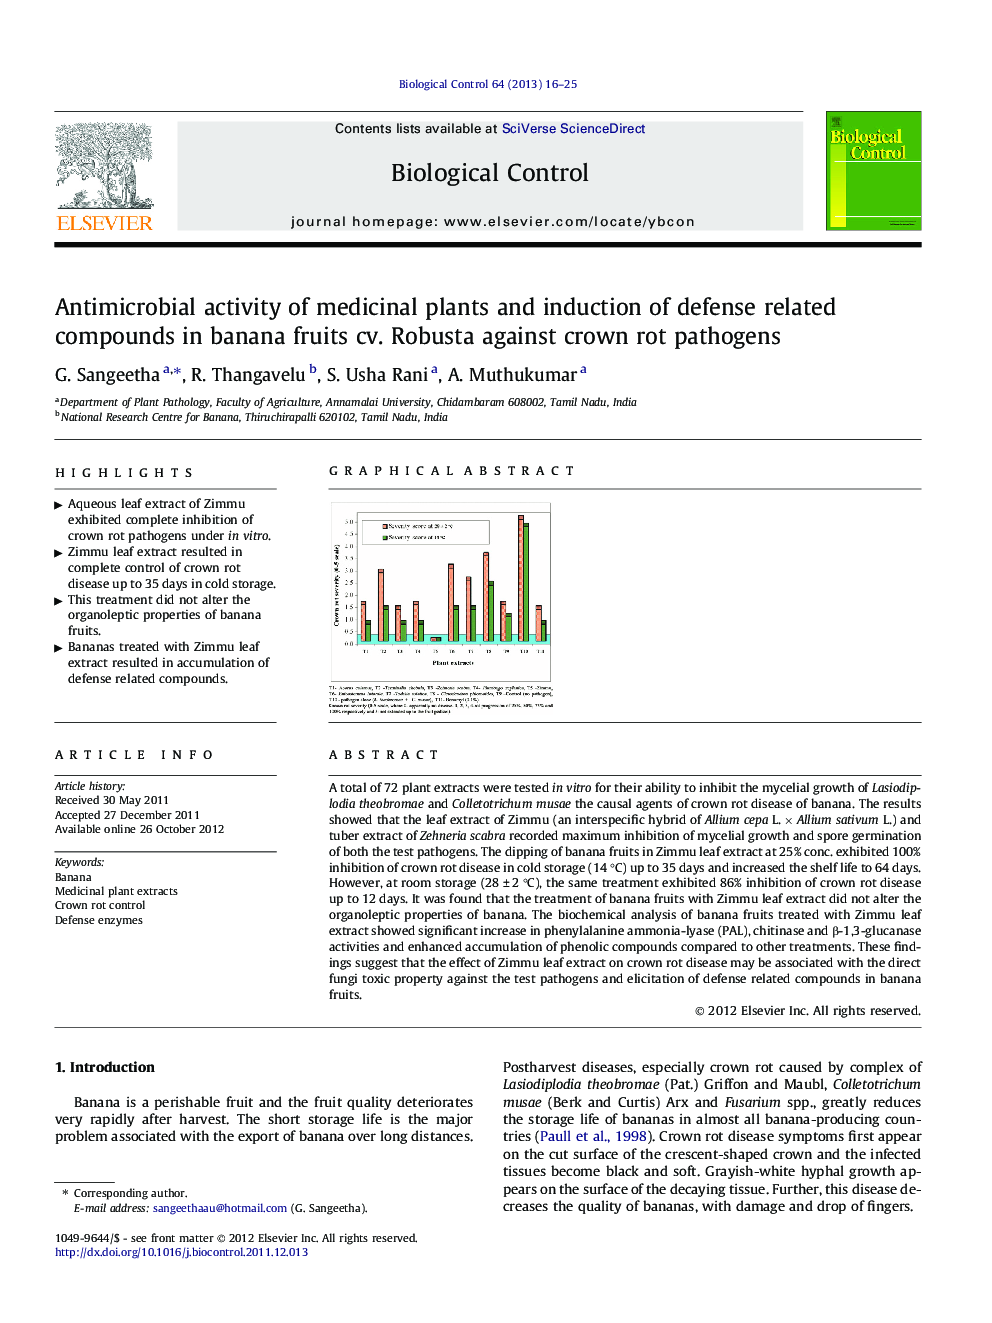 Antimicrobial activity of medicinal plants and induction of defense related compounds in banana fruits cv. Robusta against crown rot pathogens